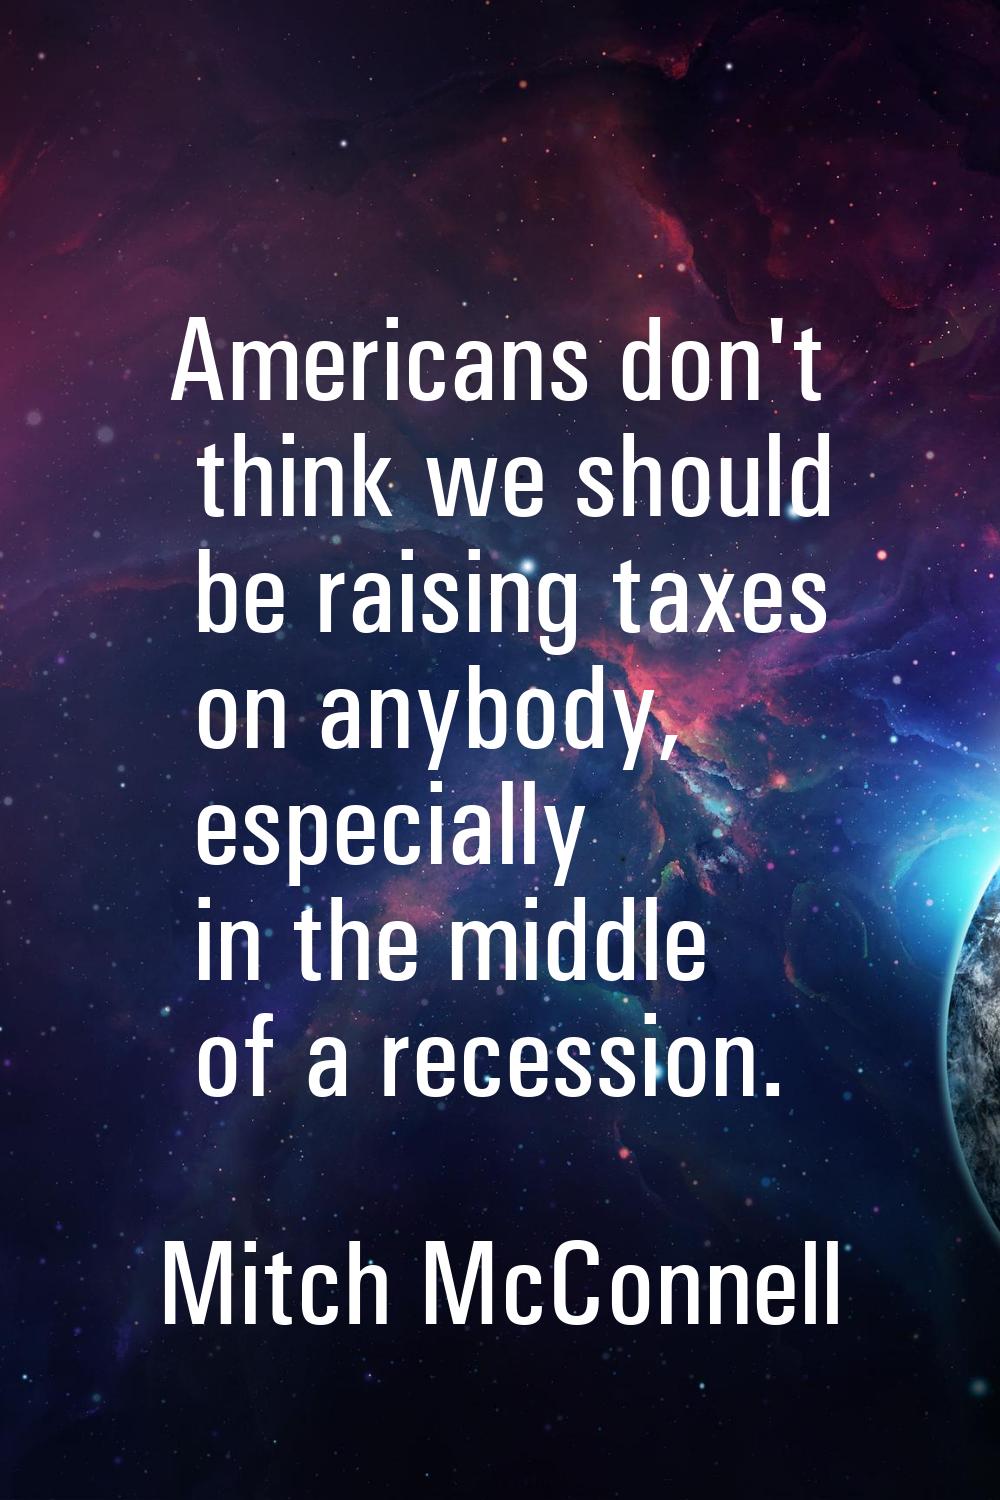 Americans don't think we should be raising taxes on anybody, especially in the middle of a recessio